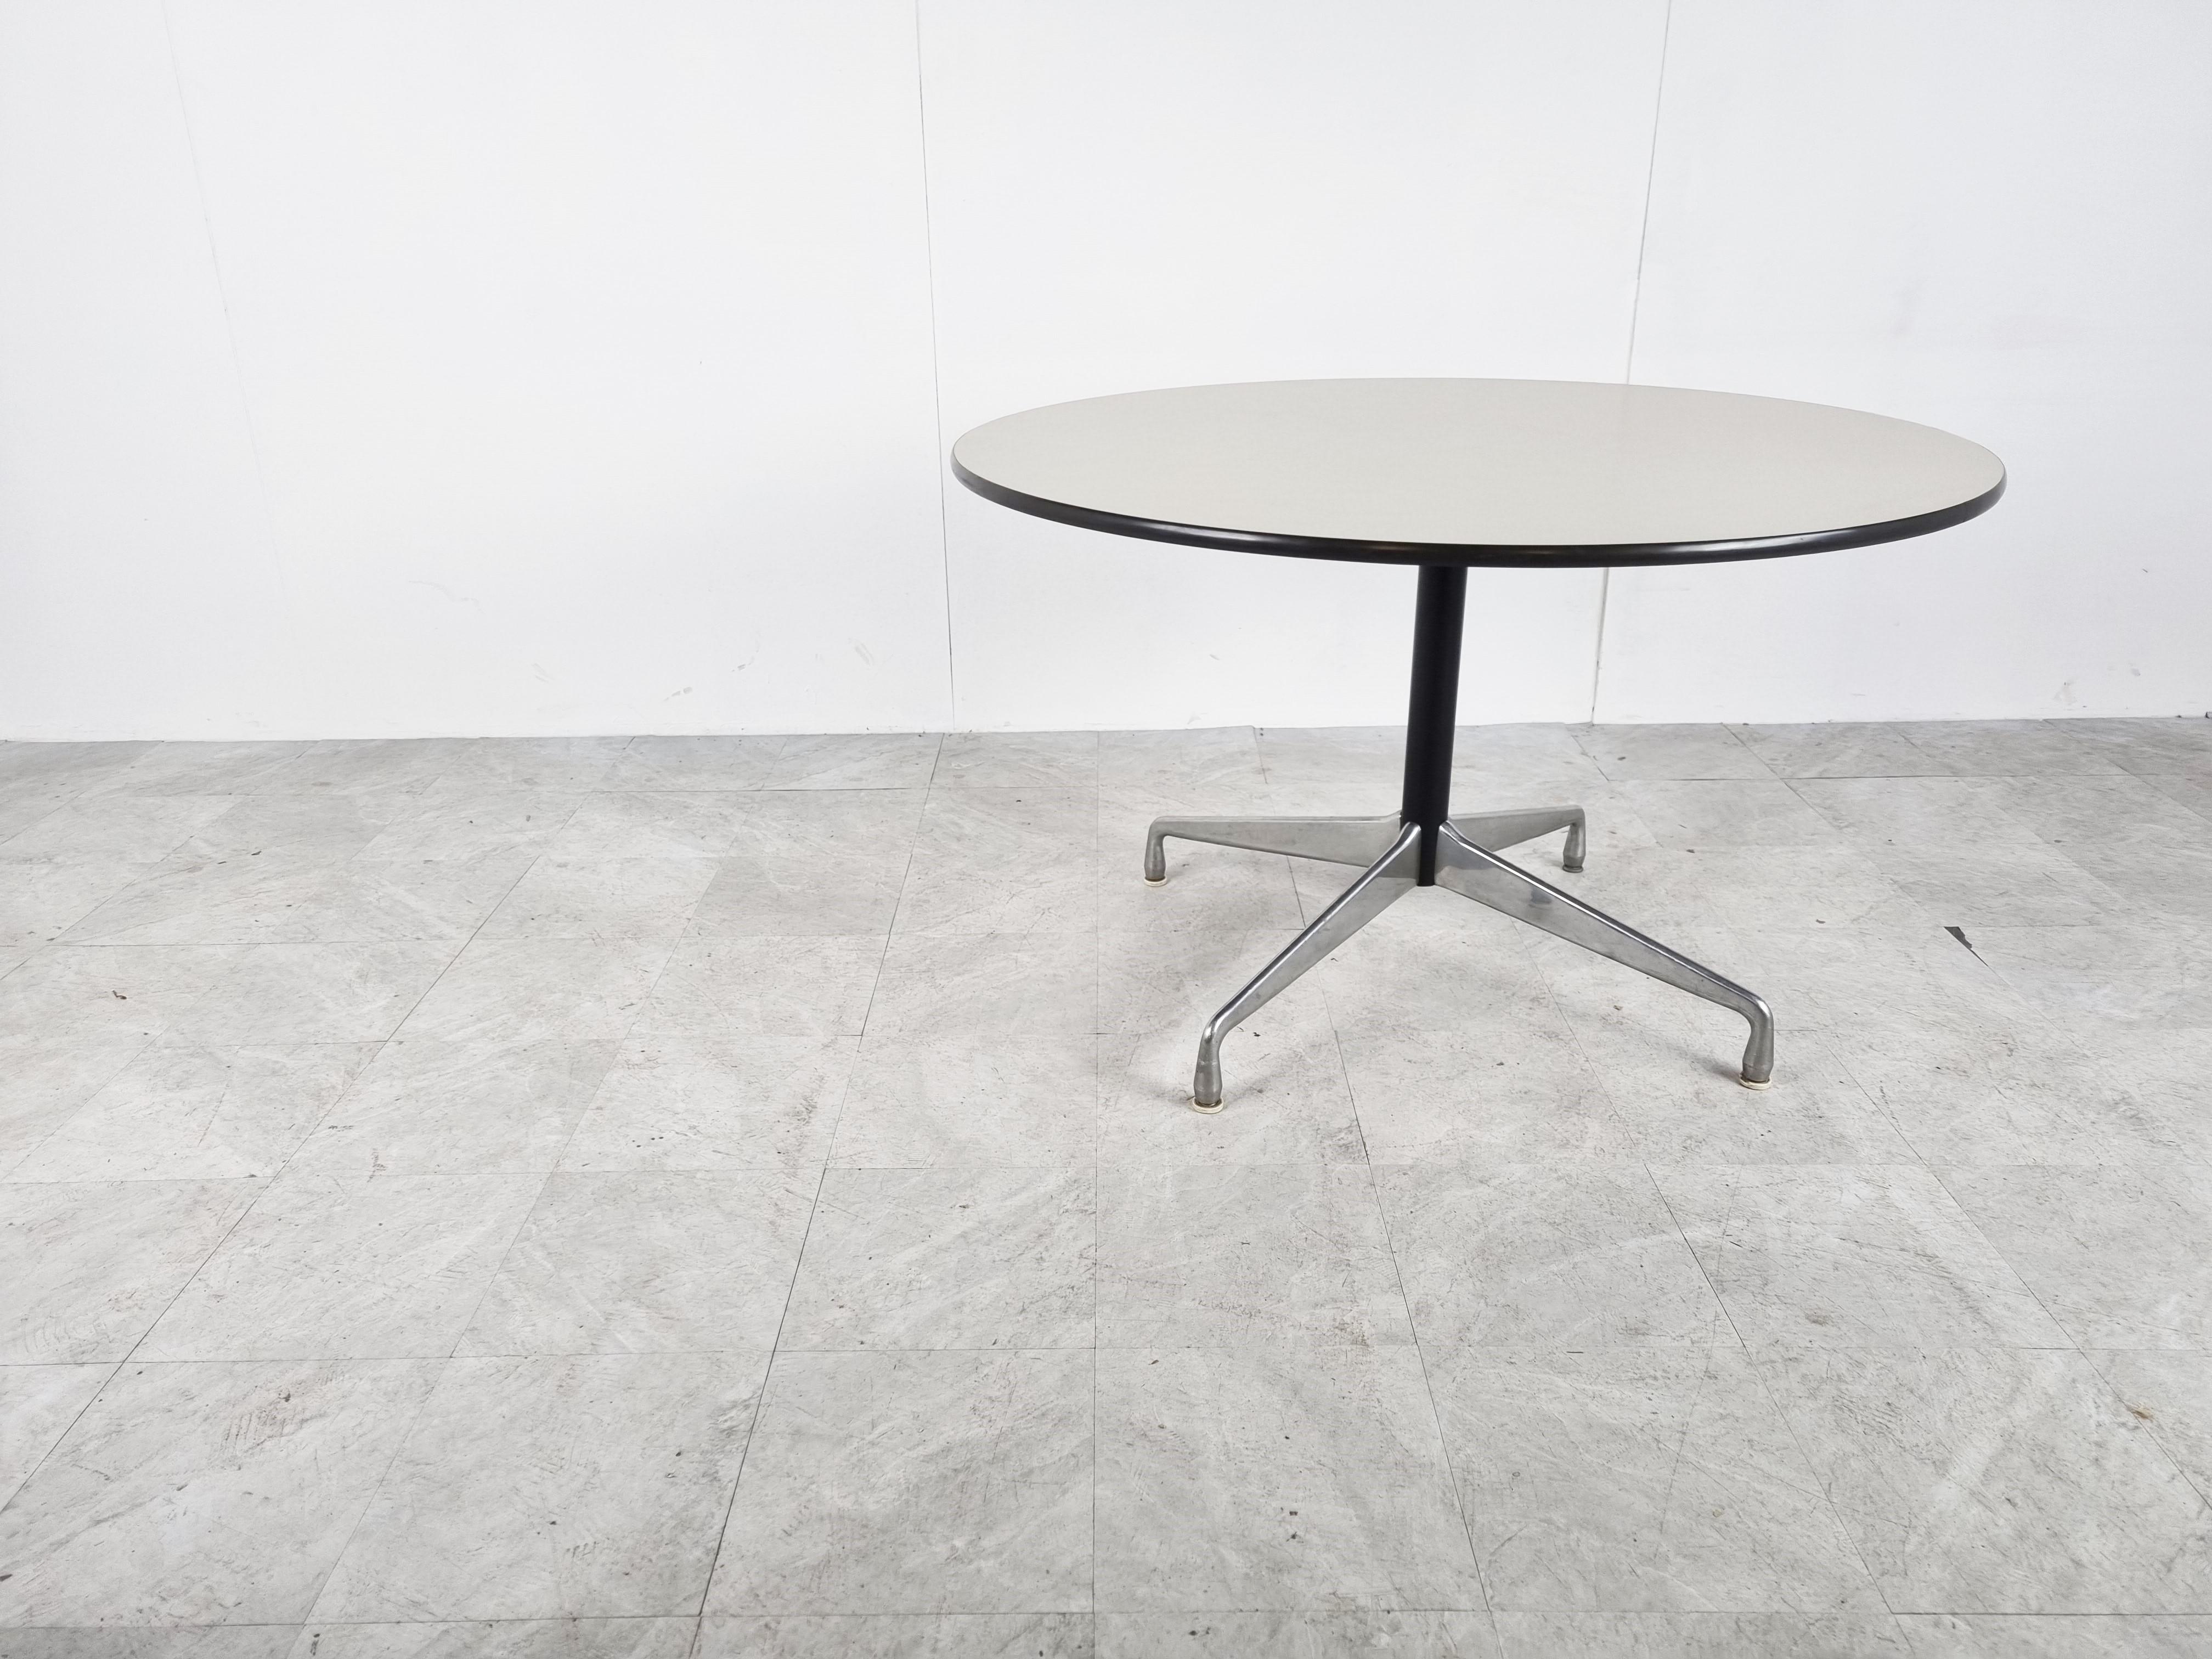 Vintage 'contract' dining or side table by Charles and Ray Eames for Herman Miller.

The Eames Contract Tables were designed together with the Aluminium Group chairs and feature the latter's cruciform base

The table is in good original